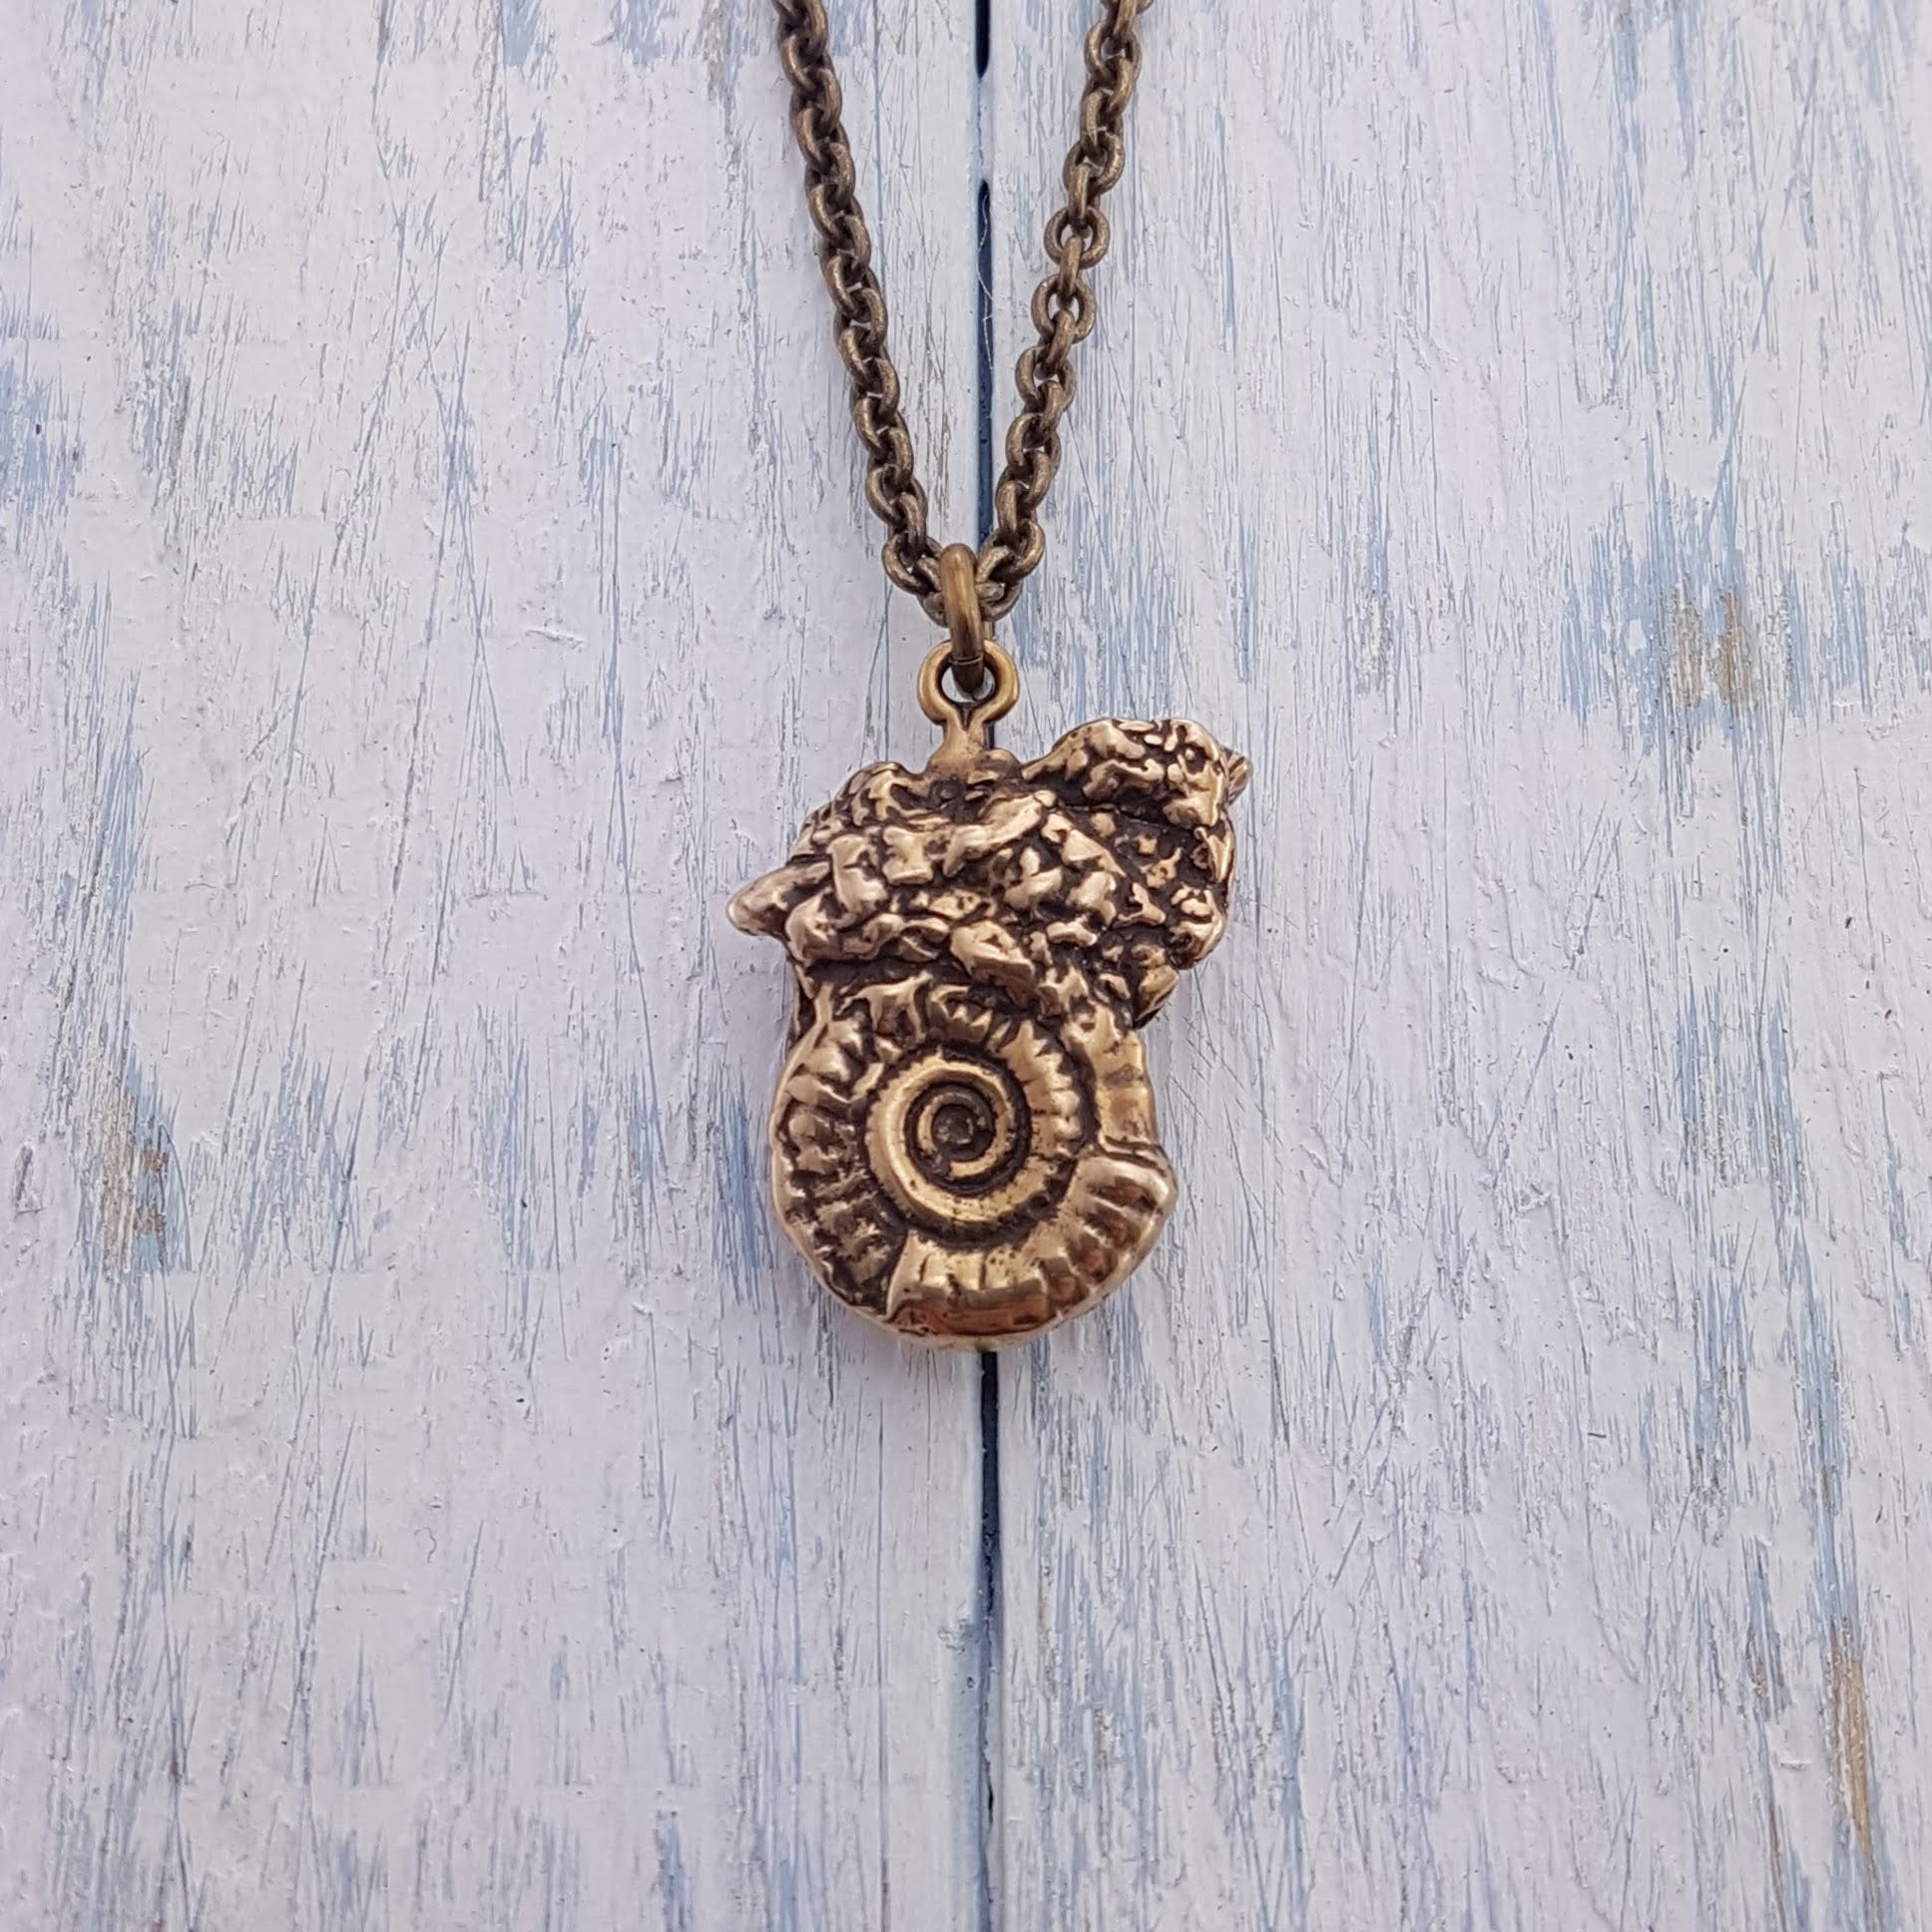 Ammonites Fossil Necklace - Gwen Delicious Jewelry Designs